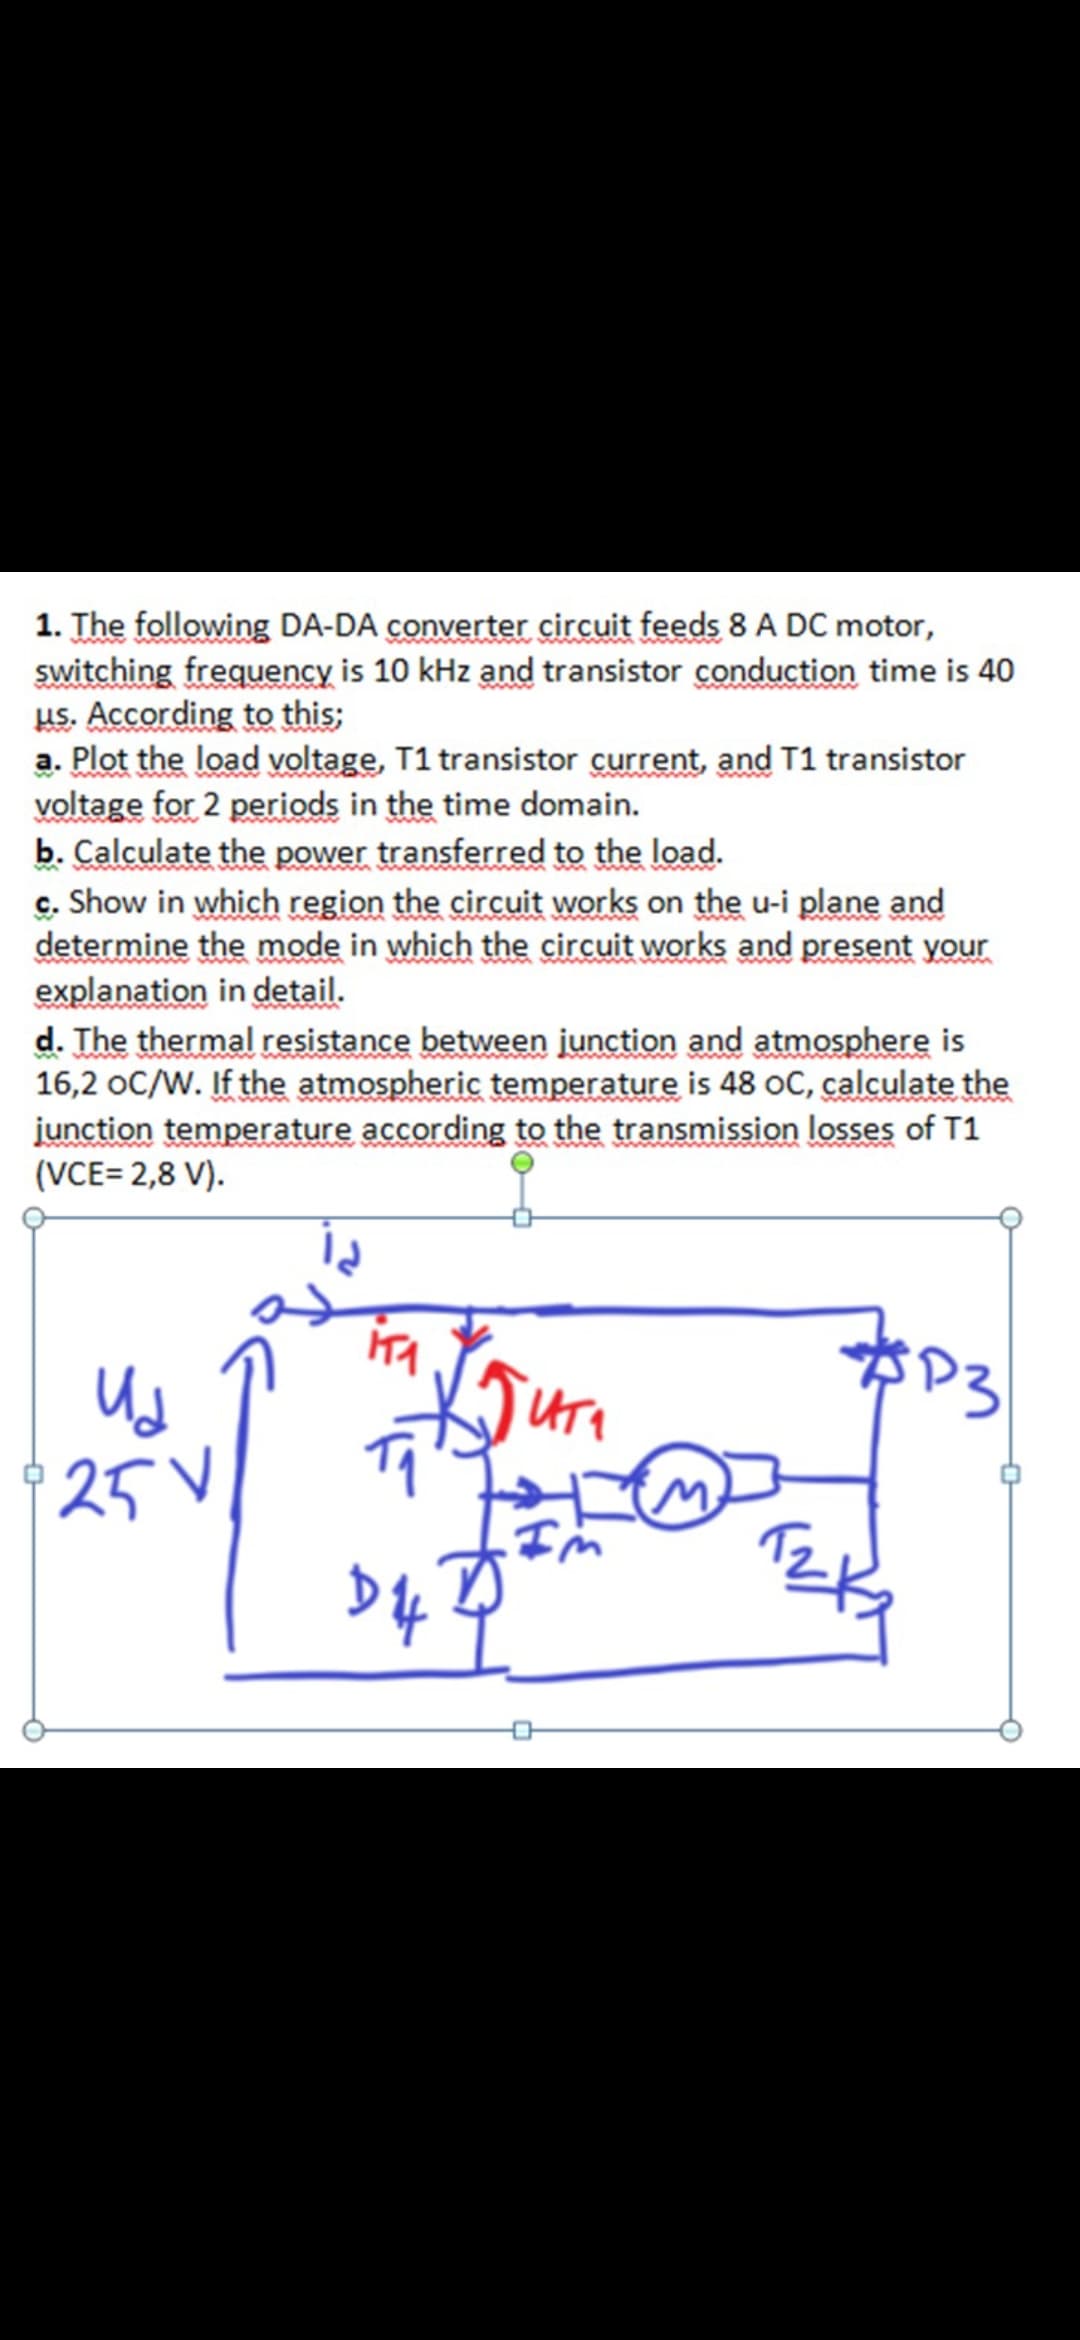 1. The following DA-DA converter circuit feeds 8 A DC motor,
switching frequency is 10 kHz and transistor conduction time is 40
us. According to this;
a. Plot the load voltage, T1 transistor current, and T1 transistor
voltage for 2 periods in the time domain.
b. Calculate the power transferred to the load.
c. Show in which region the circuit works on the u-i plane and
determine the mode in which the circuit works and present your
explanation in detail.
d. The thermal resistance between junction and atmosphere is
16,2 oC/W. If the atmospheric temperature is 48 oC, calculate the
junction temperature according to the transmission losses of T1
(VCE= 2,8 V).
25V
